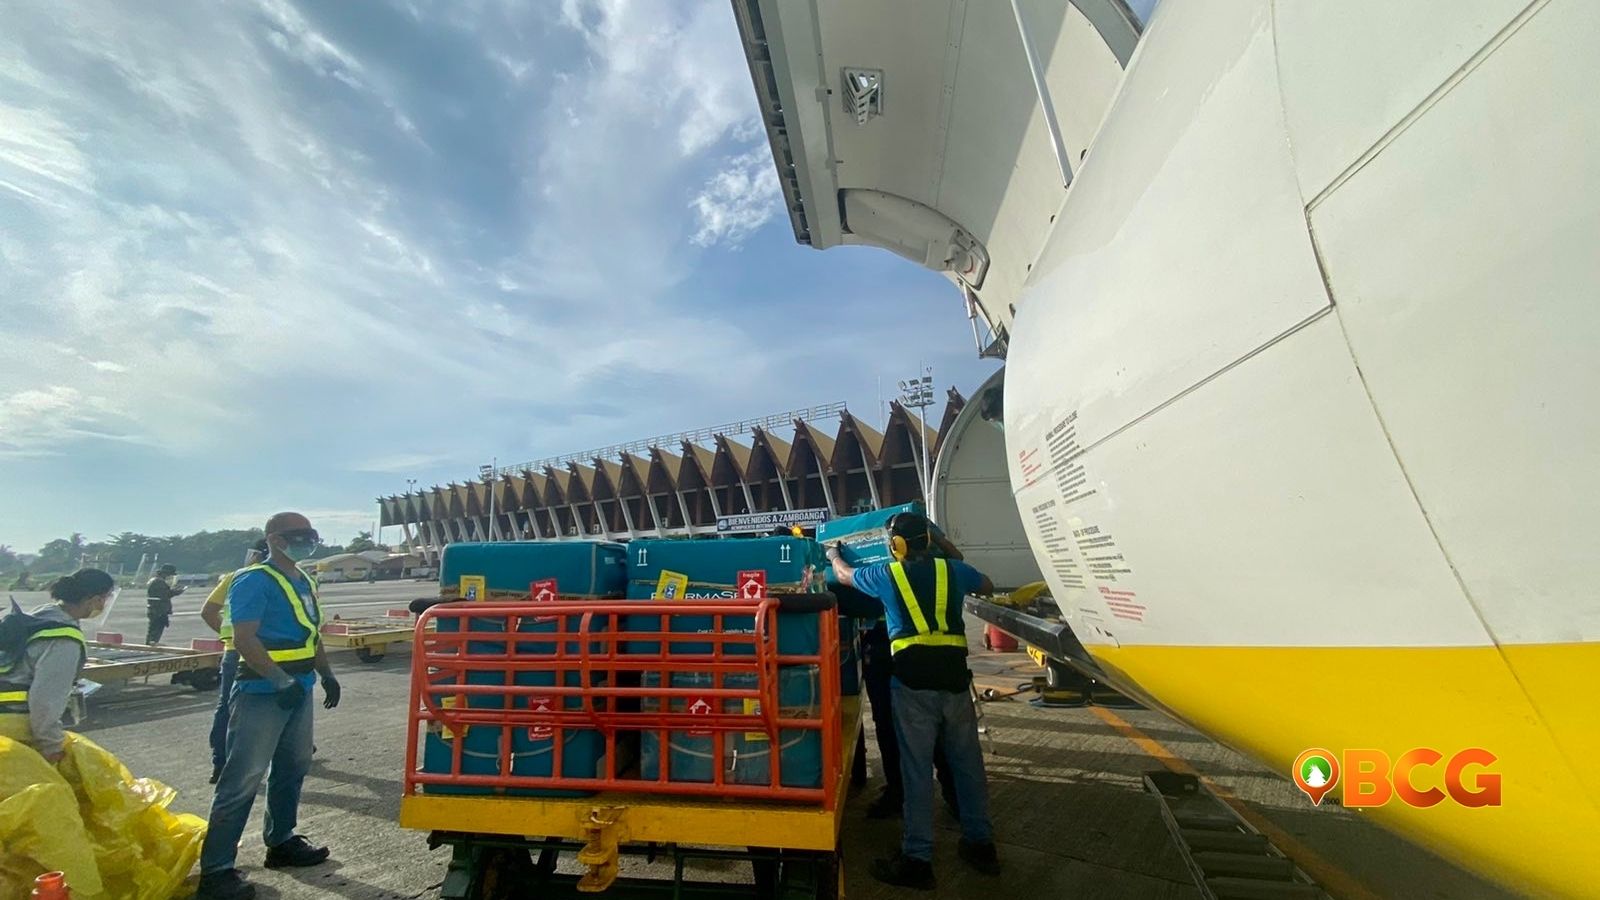 Vaccines being loaded in a Cebu pacific plane